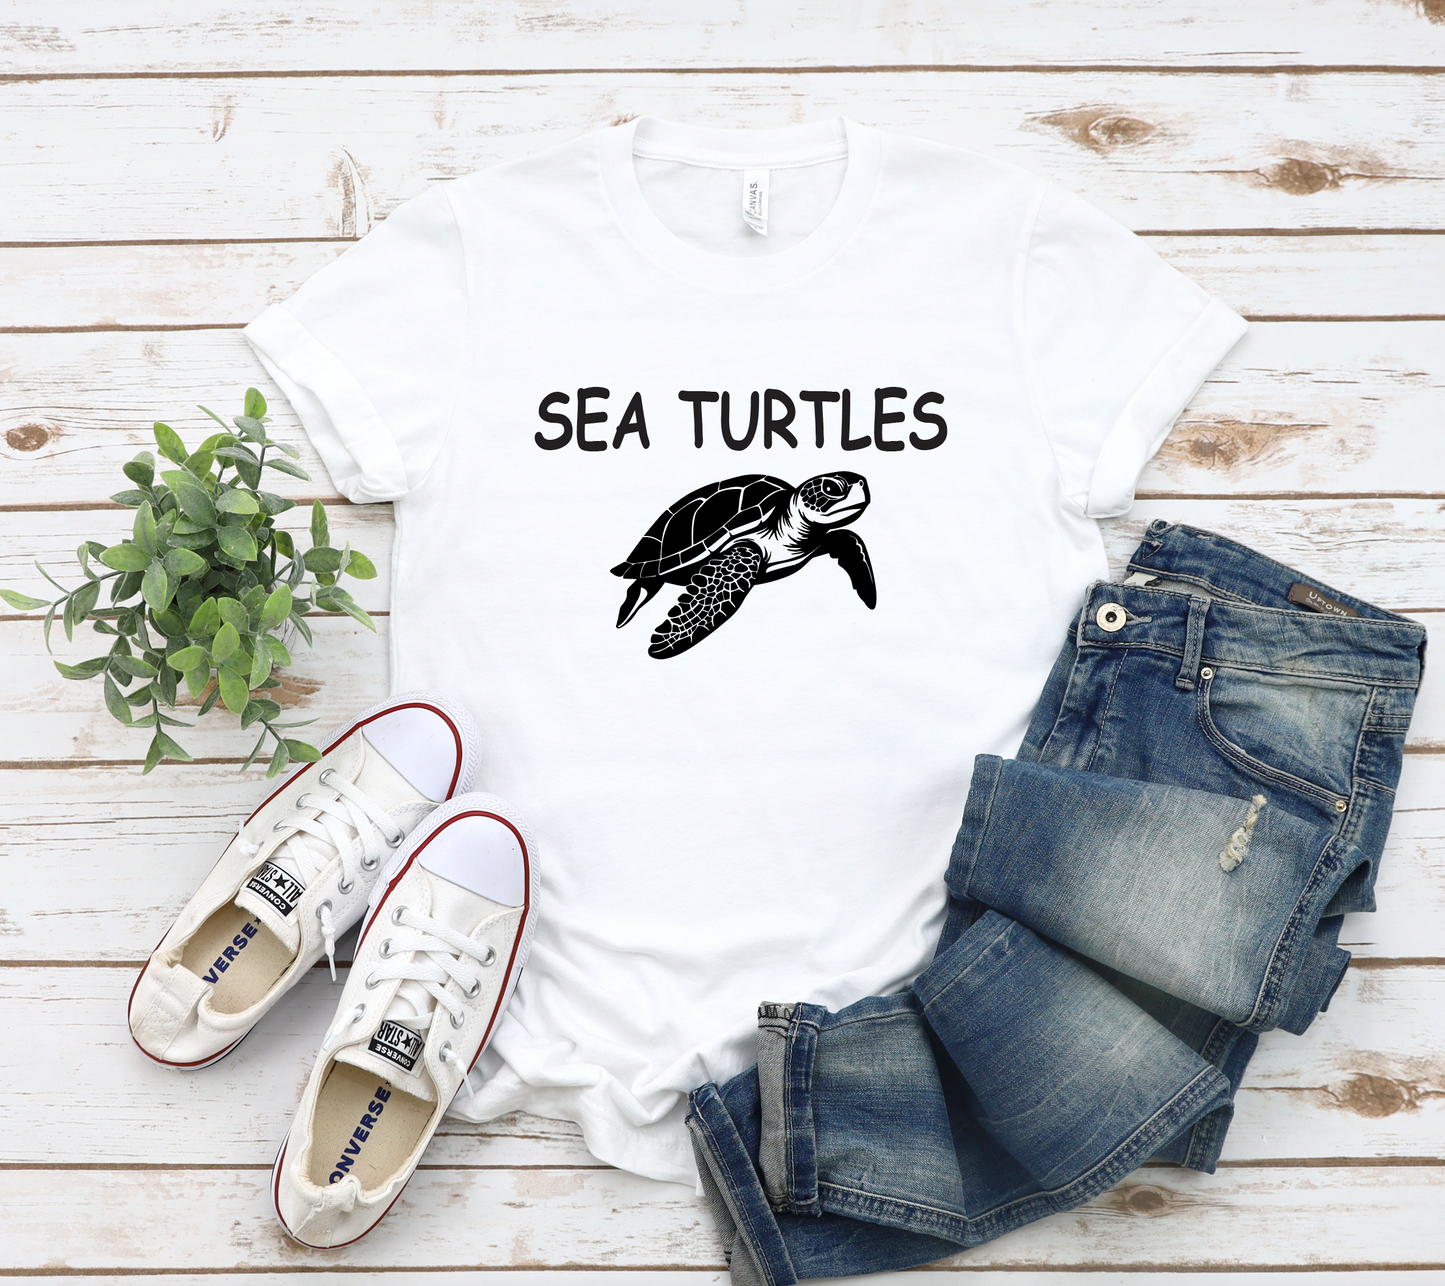 Sea Turtles - Adult ONLY